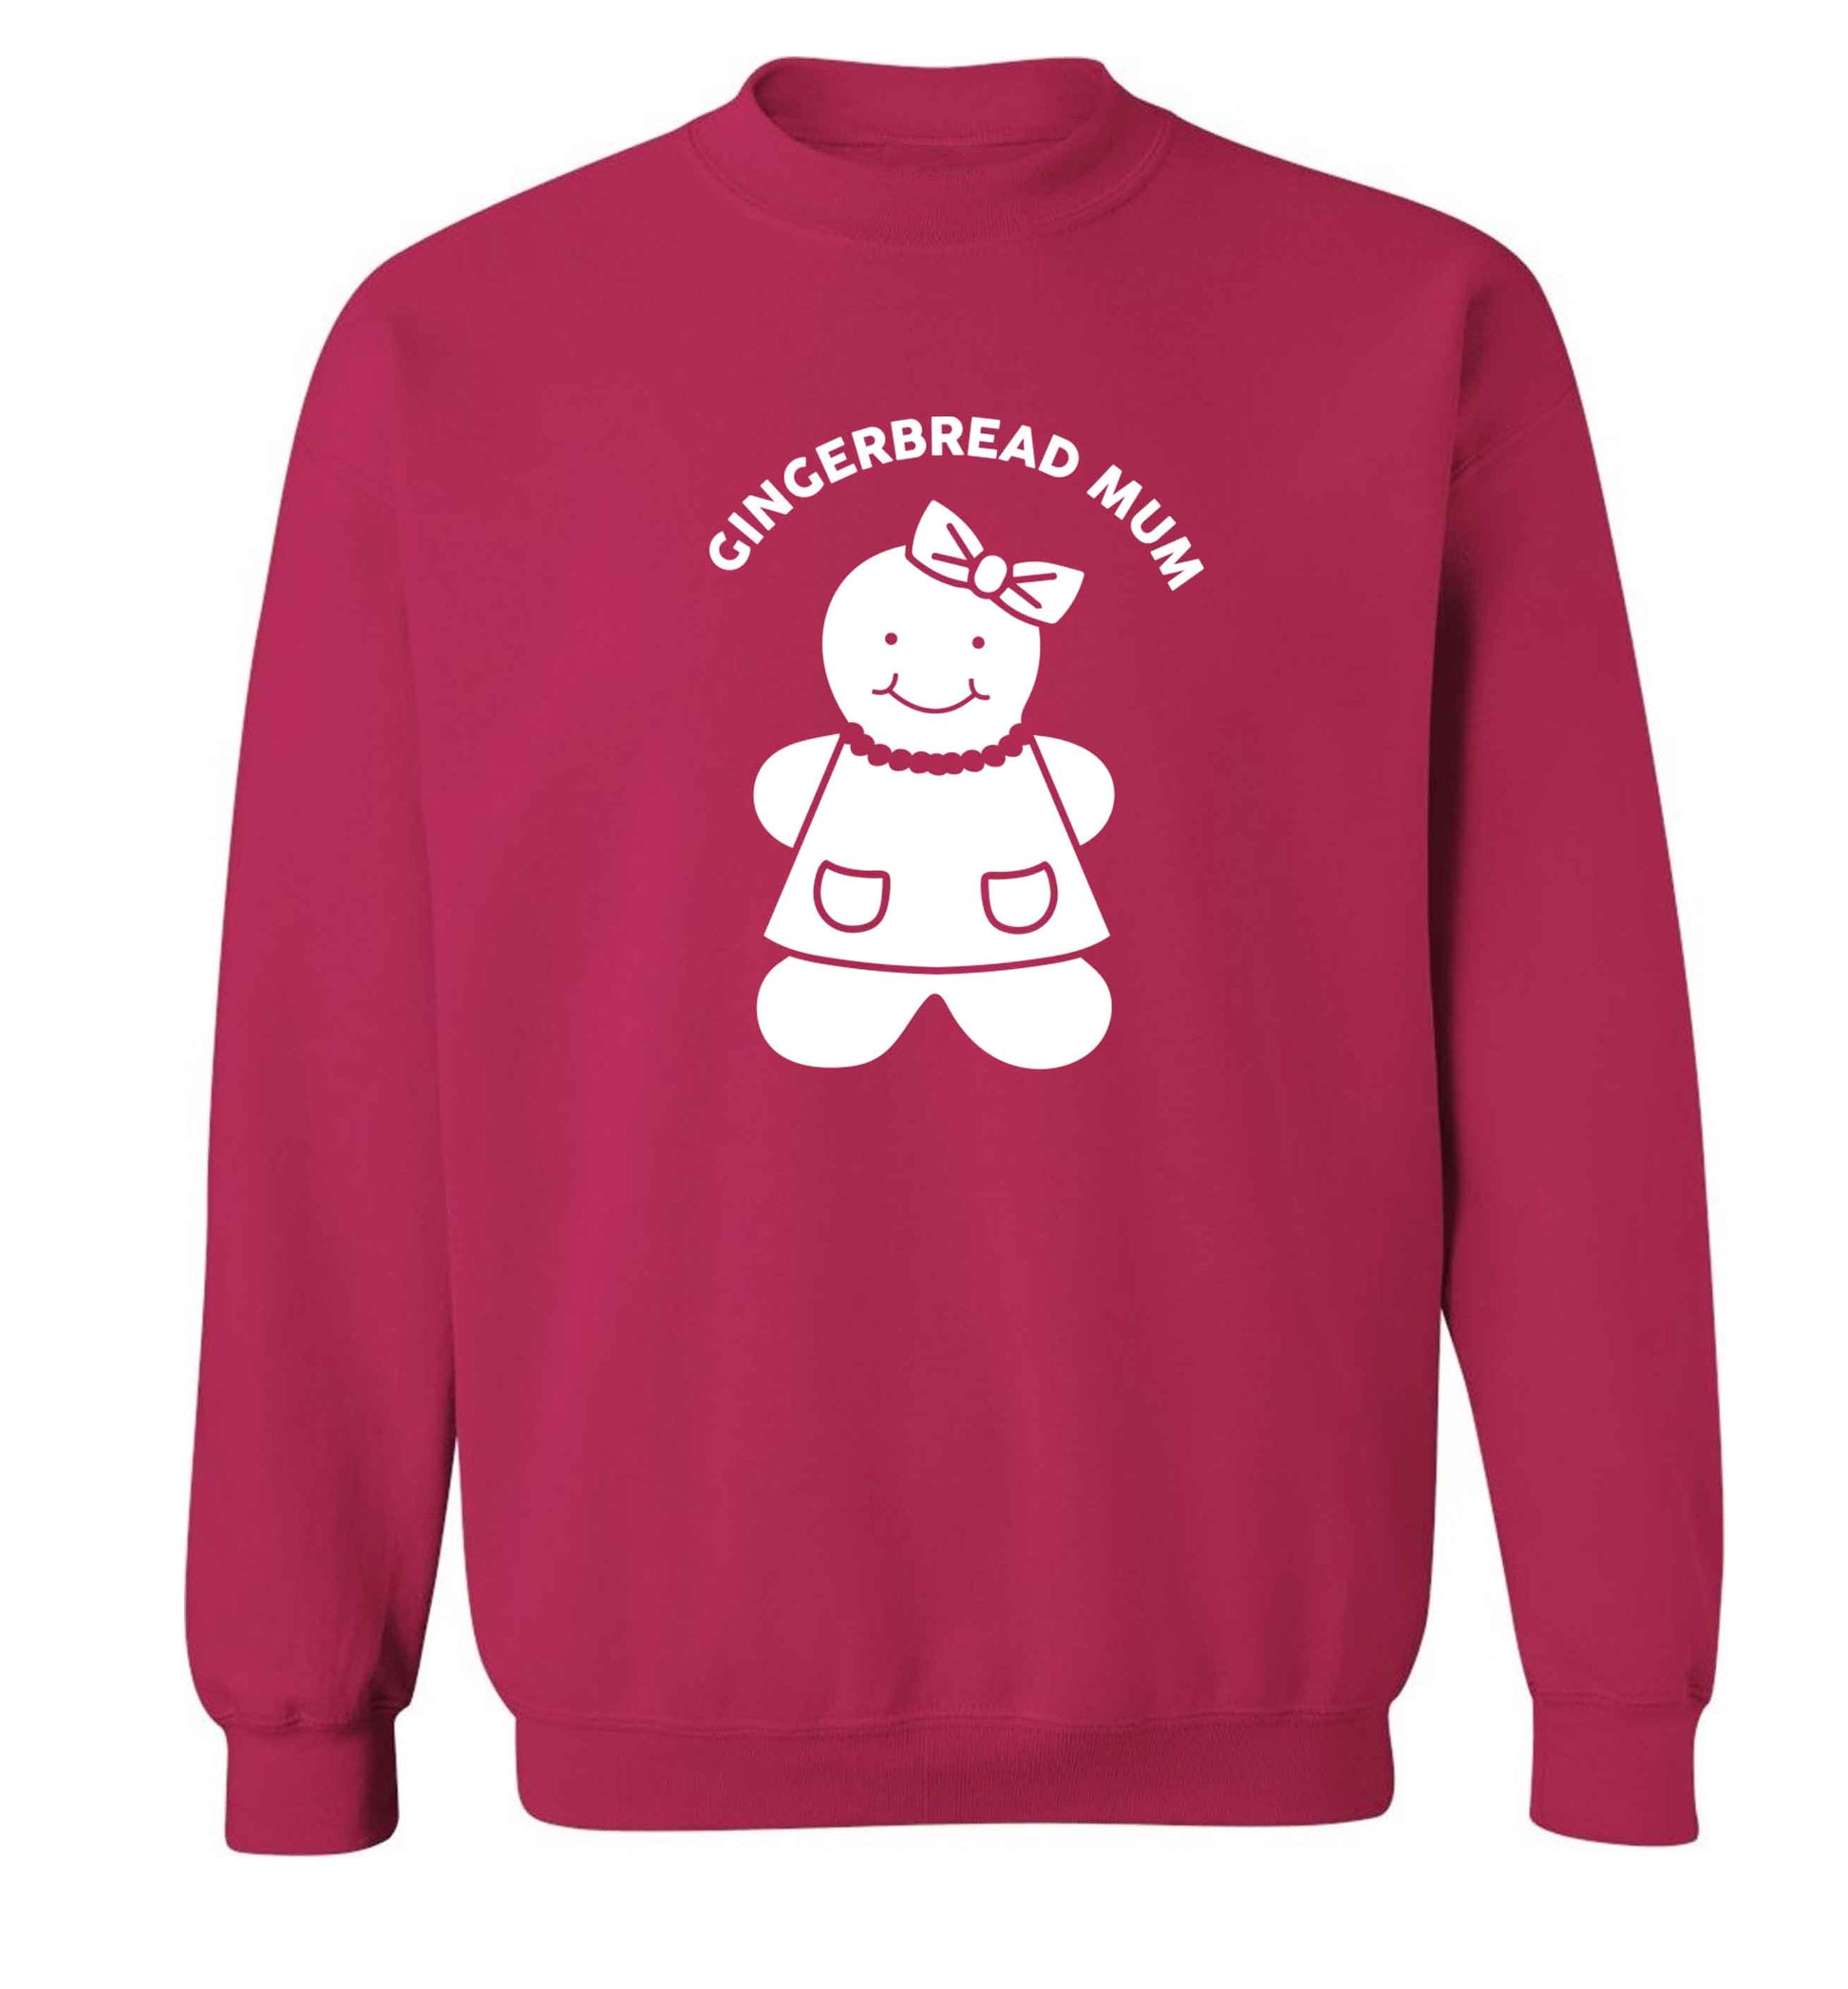 Merry Christmas adult's unisex pink sweater 2XL